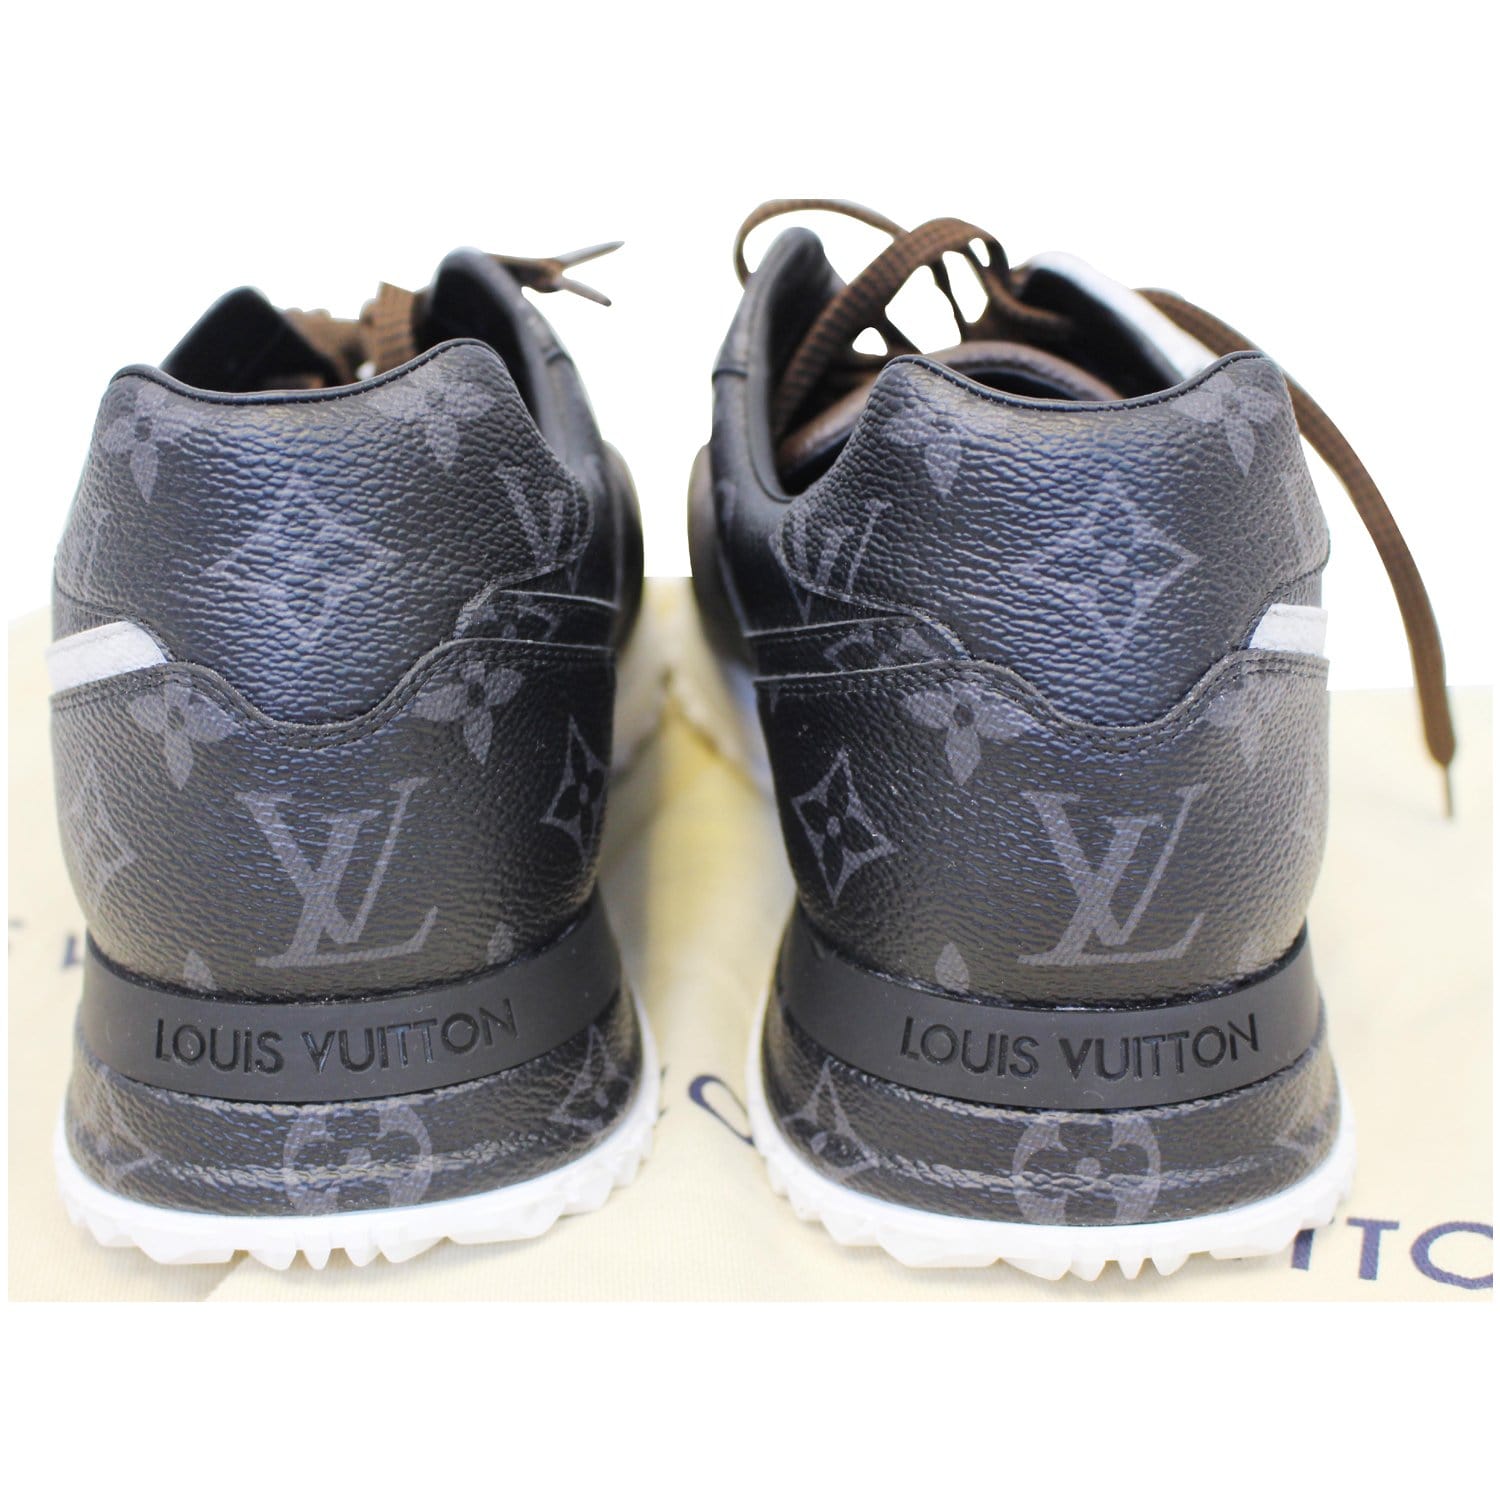 Louis Vuitton release £960 trainers that look a lot like a £14.99